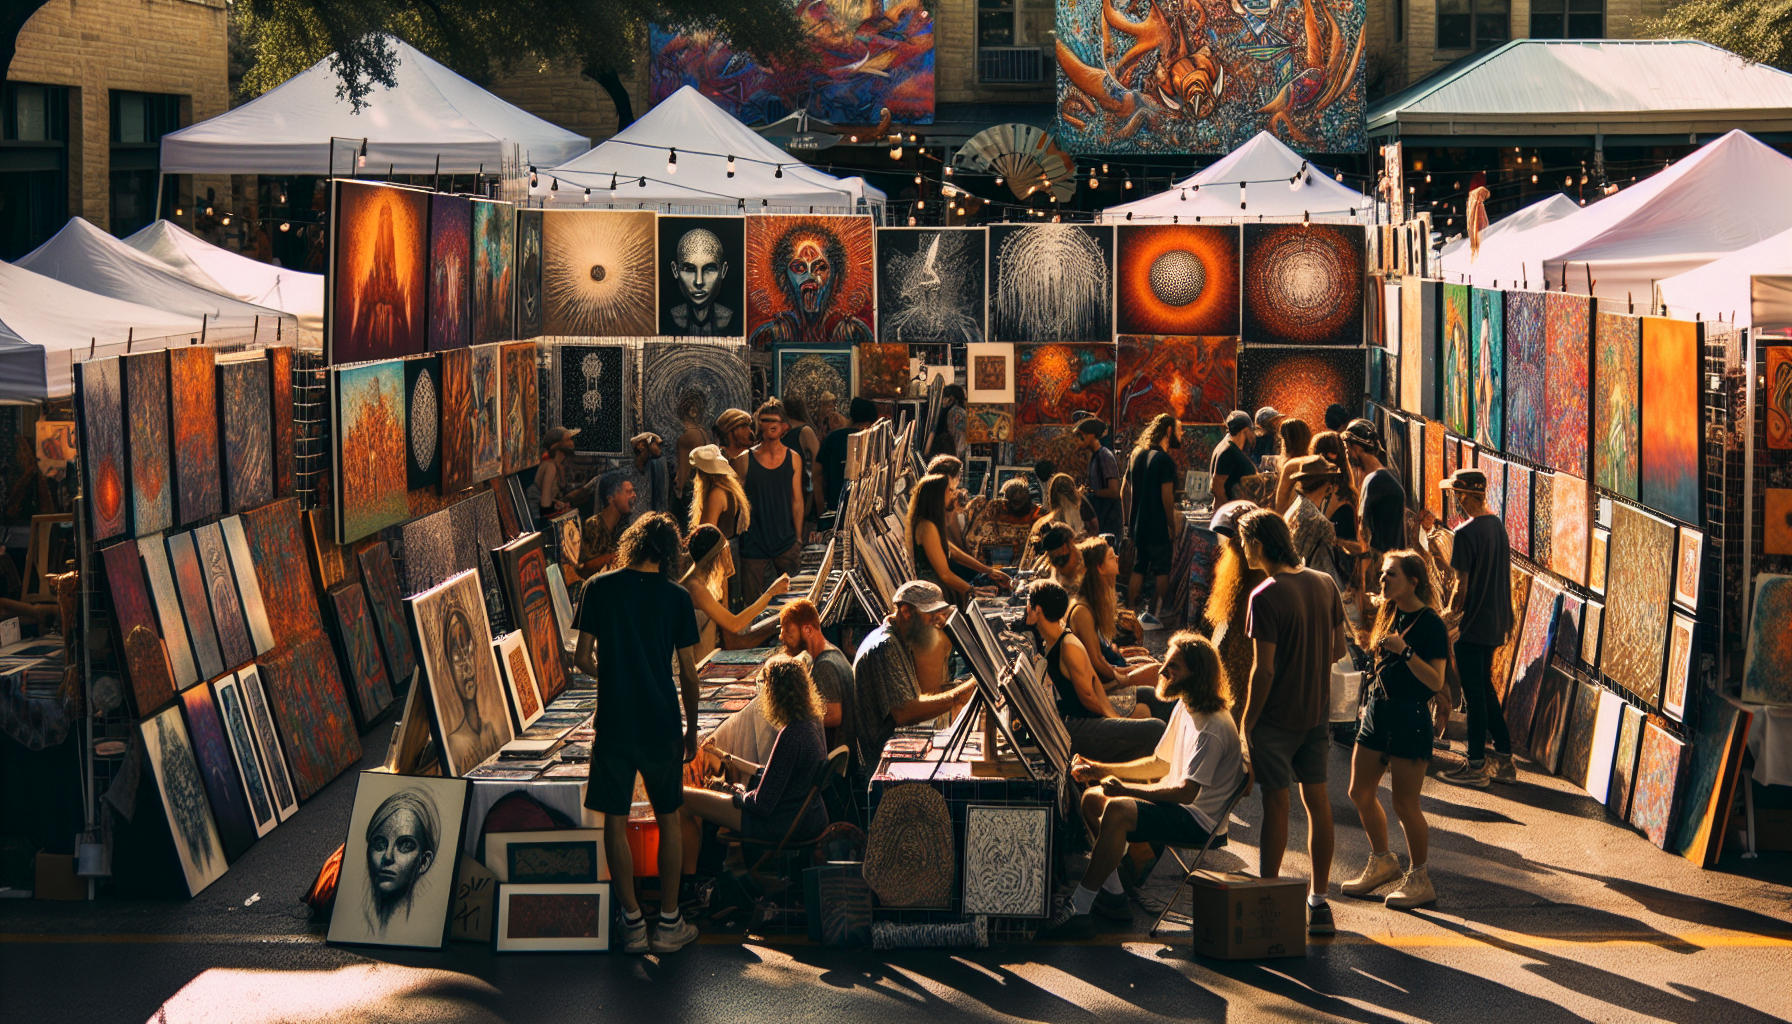 Colorful outdoor art market with bustling crowd and artist stalls